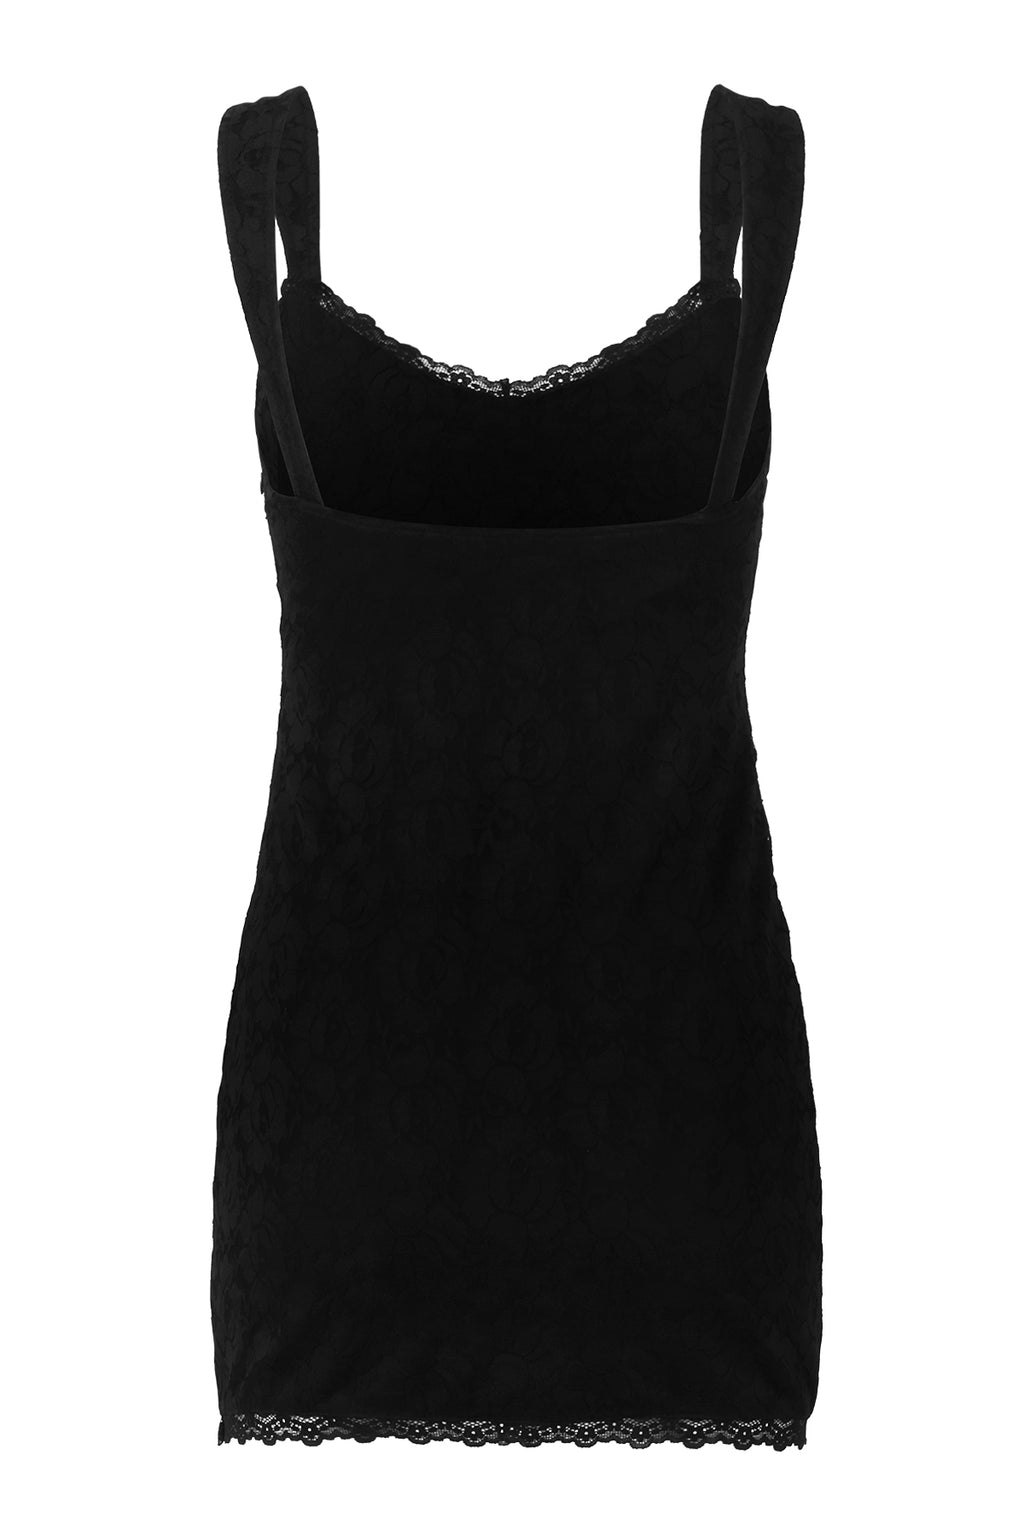 Real Love Black Lace with Contrast Trim Mini Dress